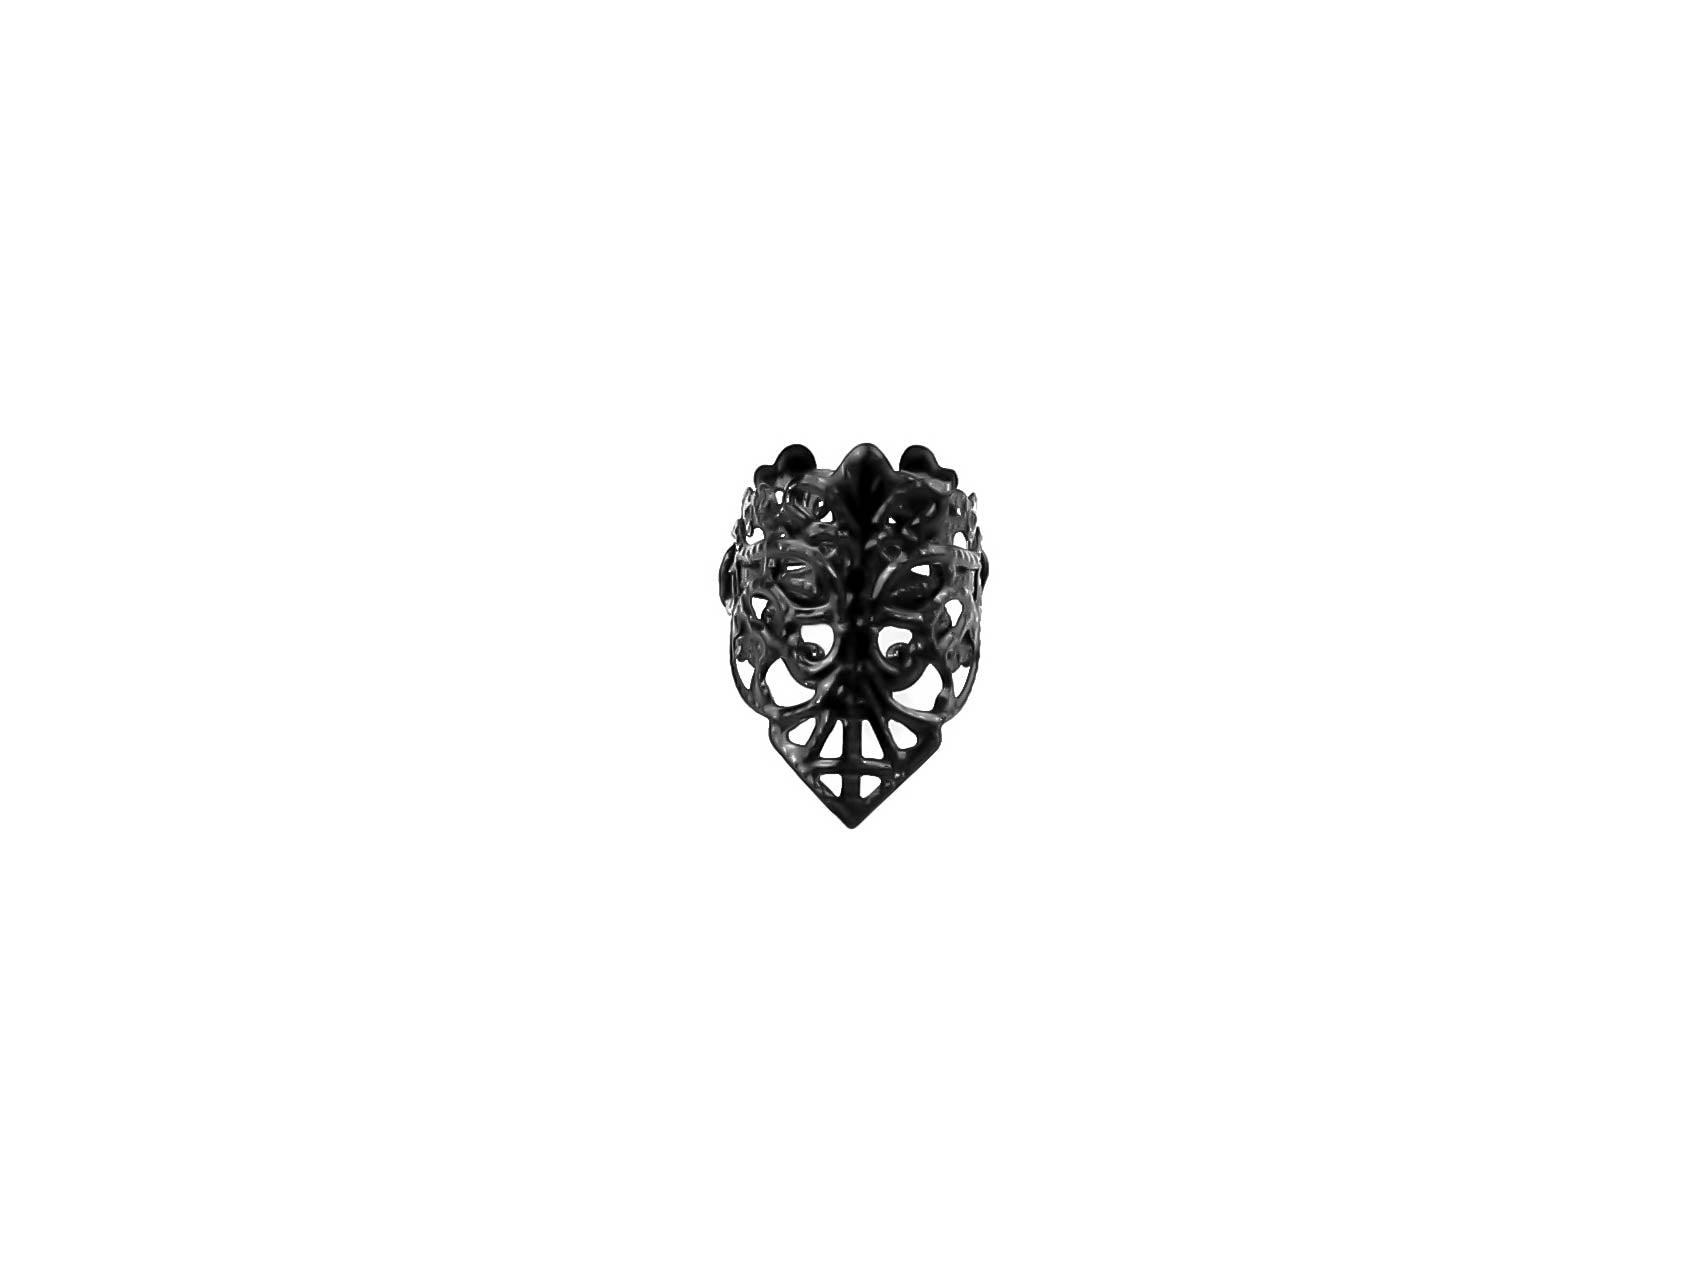  Intricate Myril Jewels gothic midi ring, a delicate yet bold piece perfect for enhancing any witchcore or neo-goth ensemble. A versatile accessory for Halloween, festivals, or as a statement piece for the avant-garde goth. Ideal as a gift for the goth girlfriend or a dramatic addition to everyday wear.